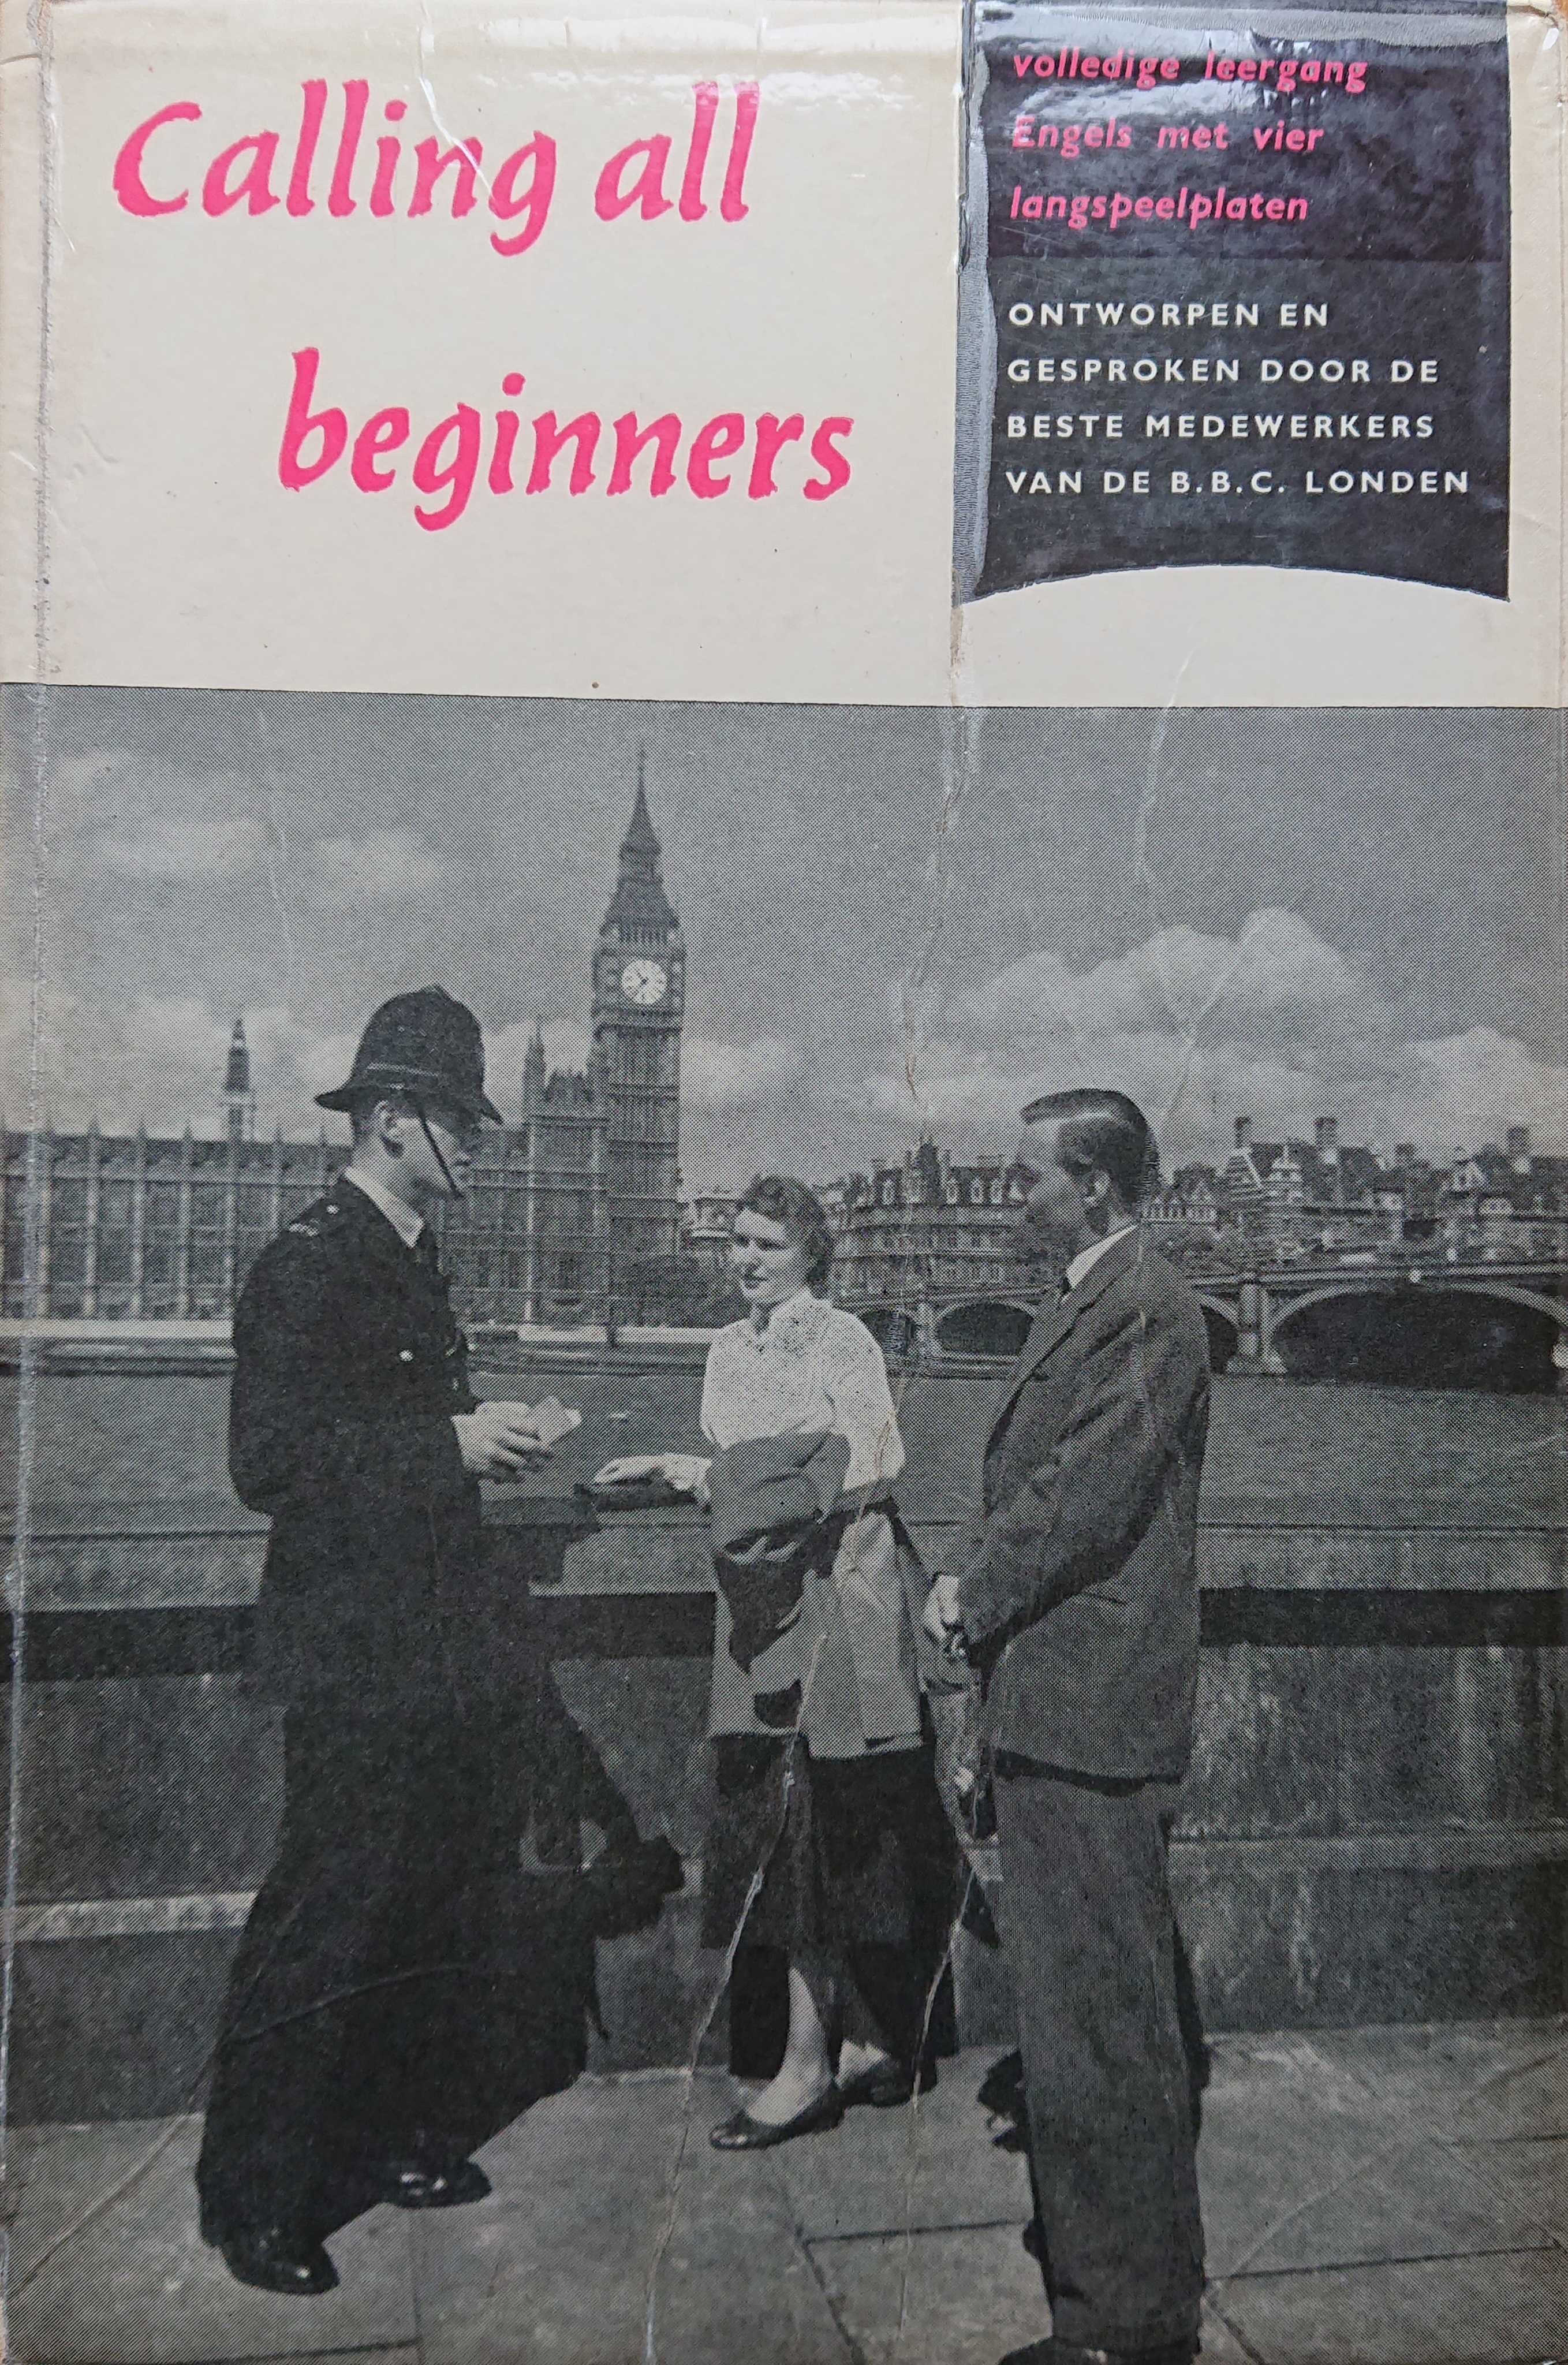 Picture of CAB-DU Calling all beginners - Dutch import by artist D. Hicks from the BBC records and Tapes library